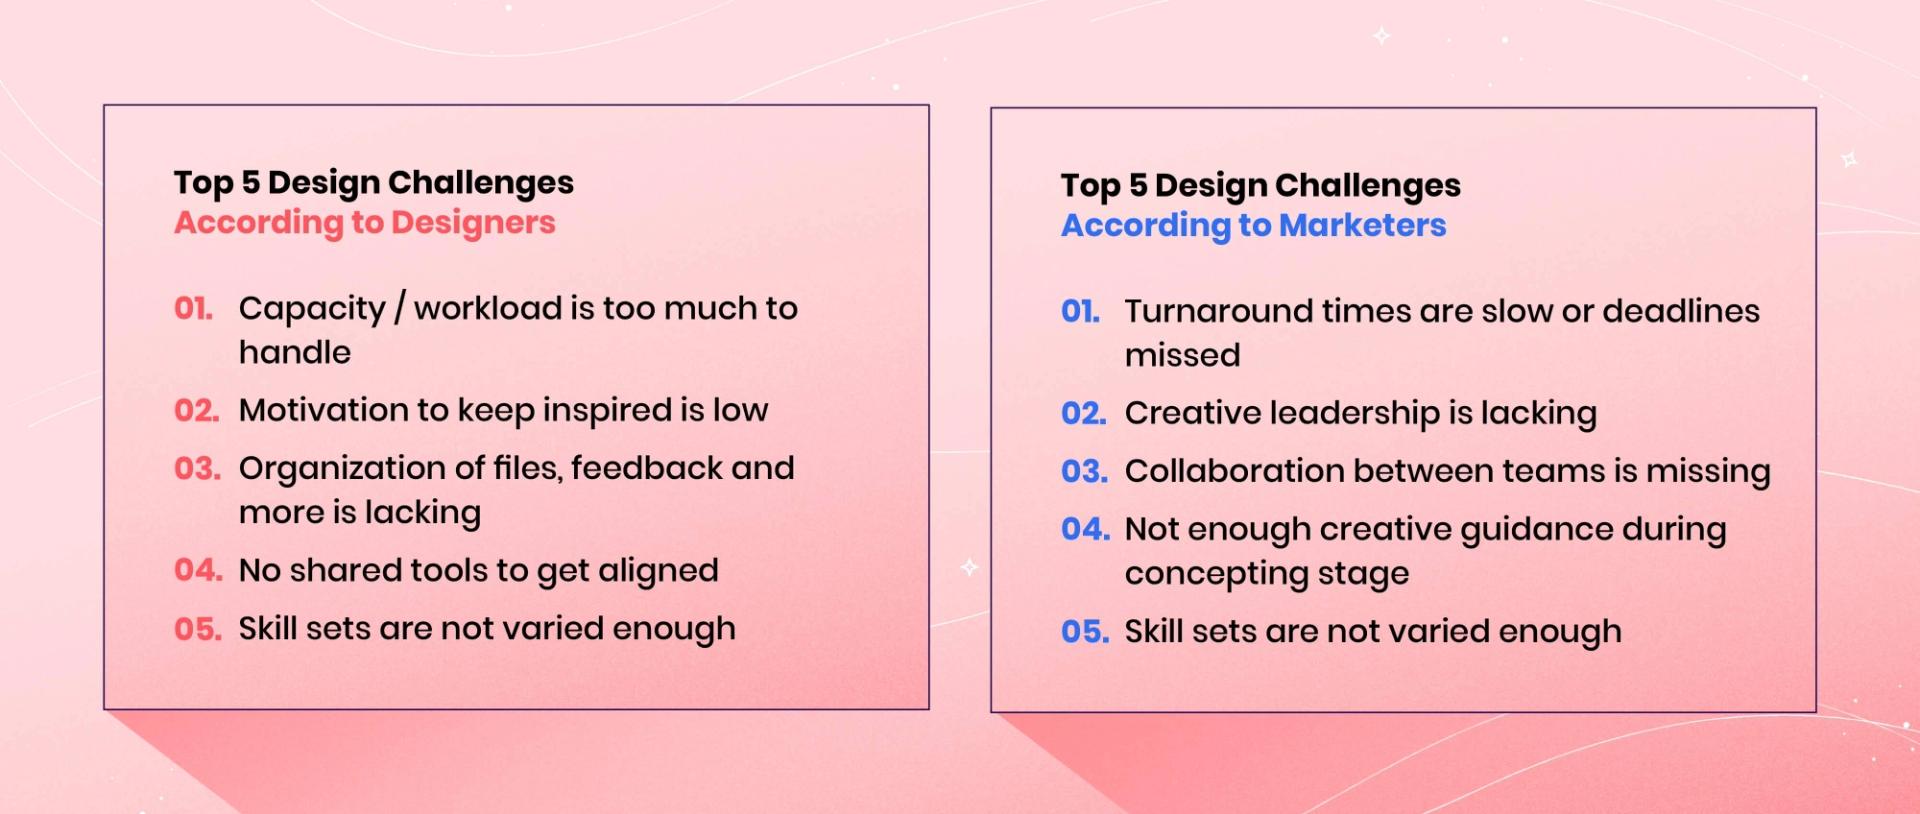 Top 5 design challenges according to designers and marketers